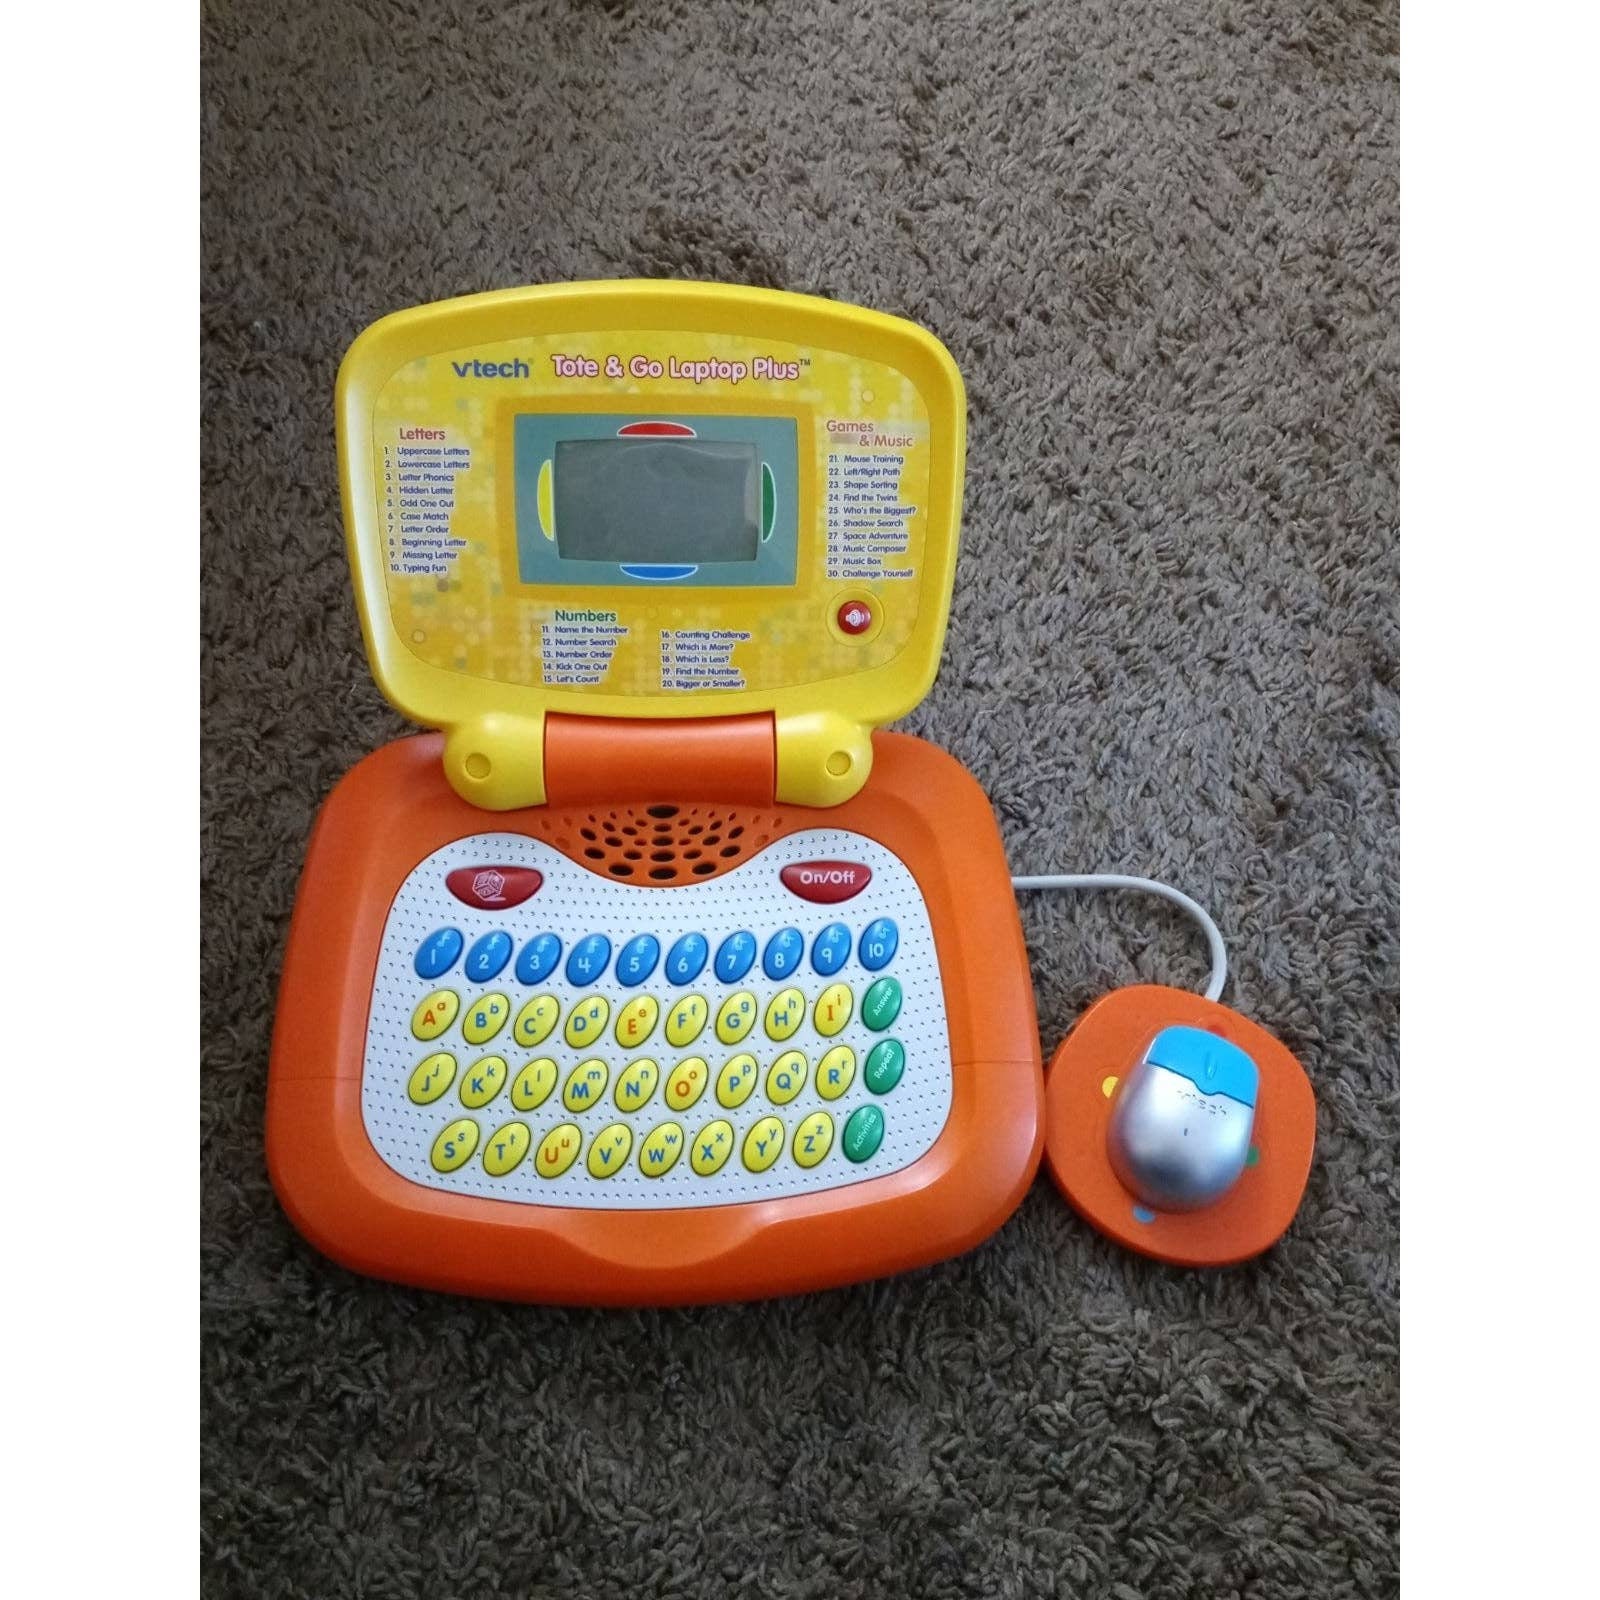 Vtech Tote & Go Bilingual Laptop Plus Blue / Lime Green Pre-owned